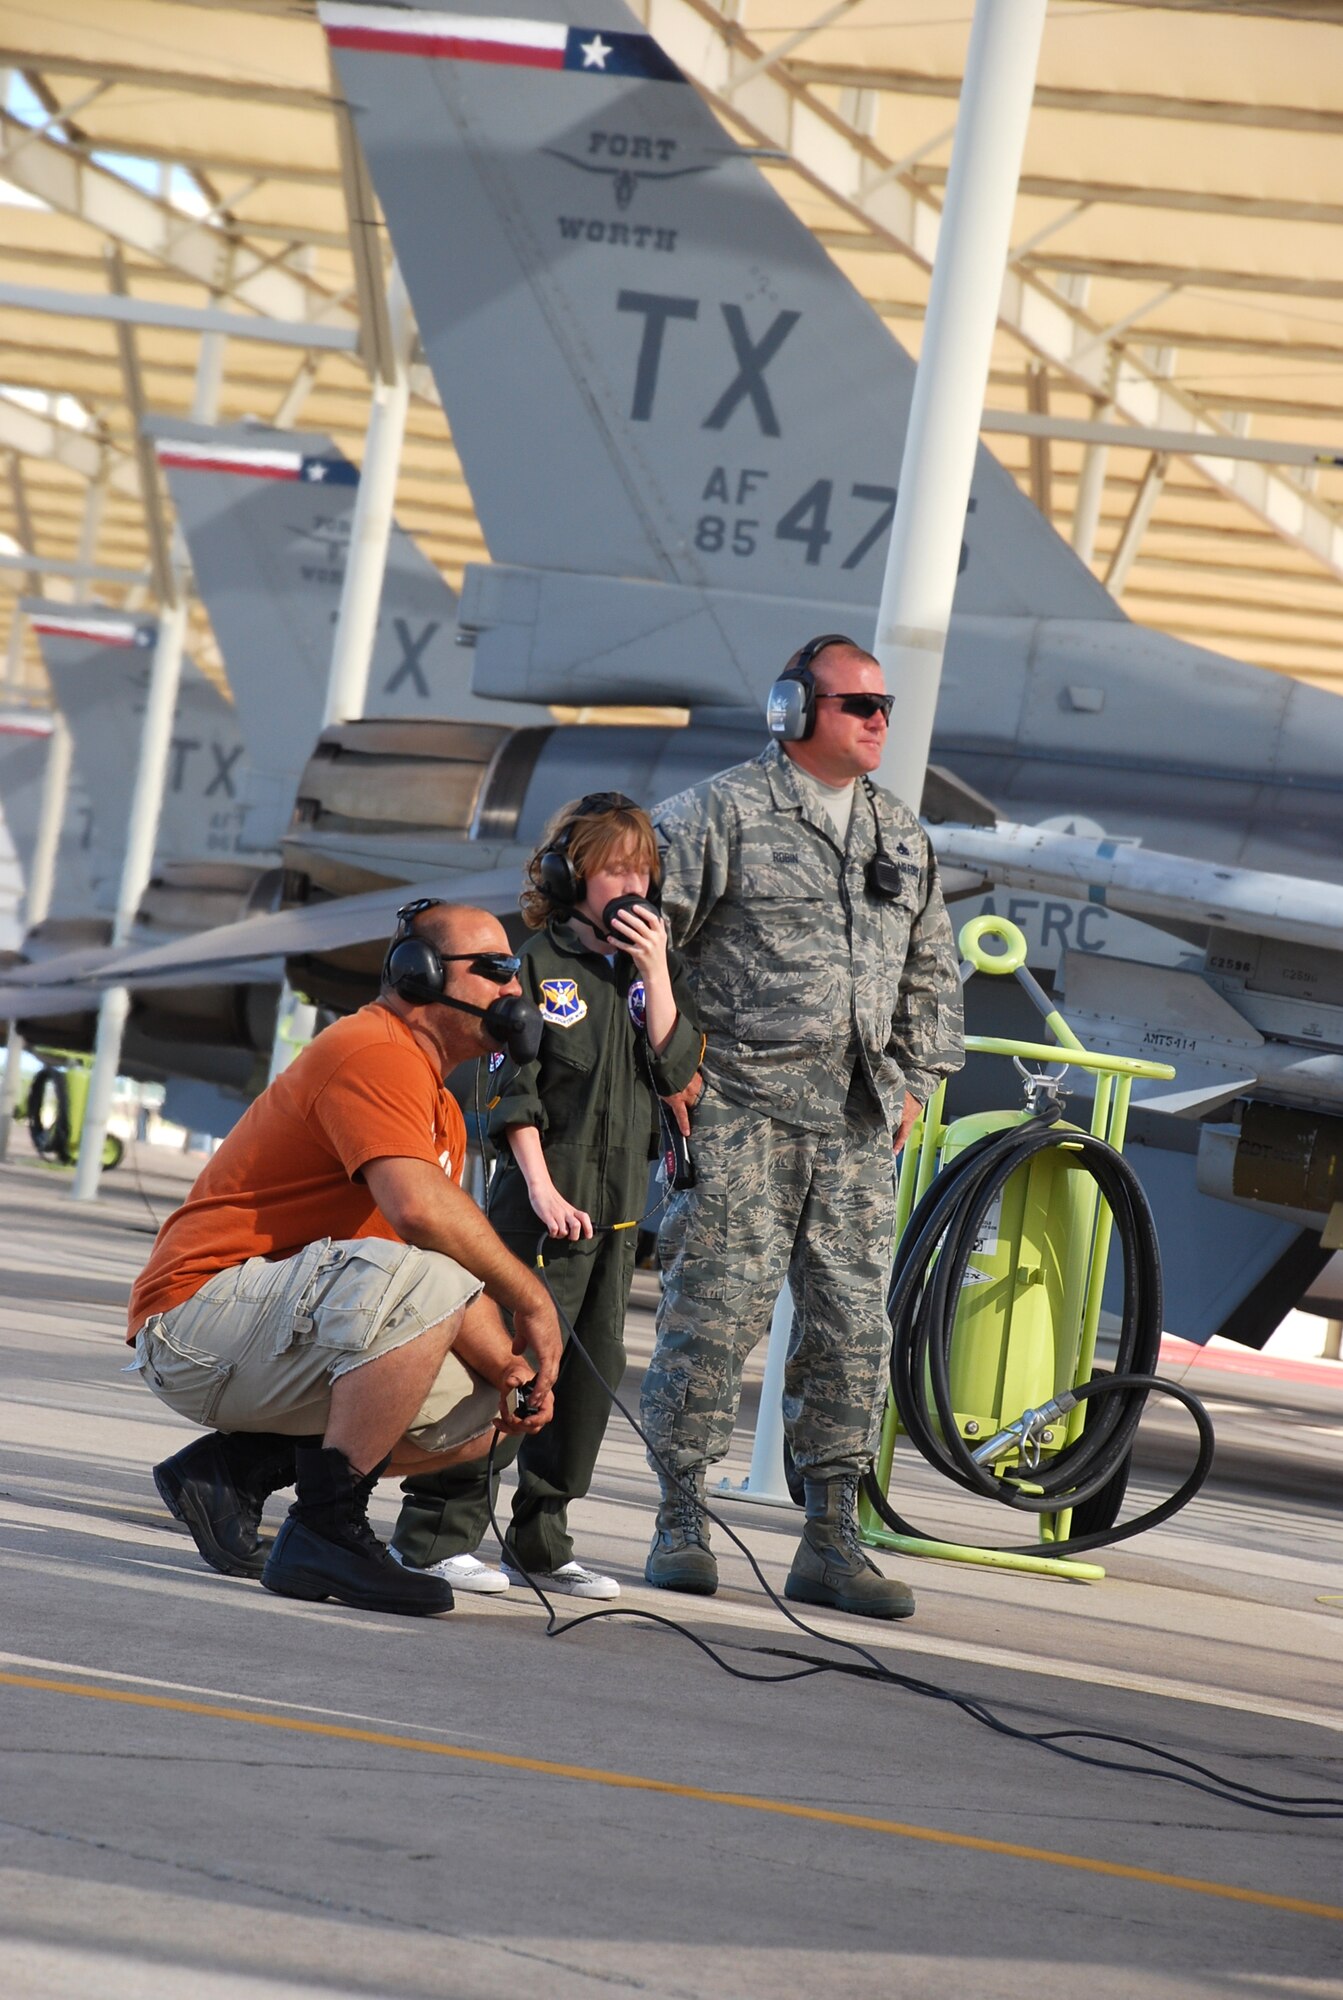 (right to left) Master Sgt. Nate Robin, 301st Aircraft Maintenance Squadron superintendent, assists Tech. Sgt. Scott Pecikonis, 301st AMXS crew chief, with the 301st Fighter Wing's latest Pilot for a Day participant. The "Pilot of the Day" program is an opportunity to have a child with a life-threatening or terminal illness visit the wing in hopes of forgetting, for just one day, their situation. The program has seen six children since it began in 2005. (U.S. Air Force Photo/Tech. Sgt. Julie Briden-Garcia)